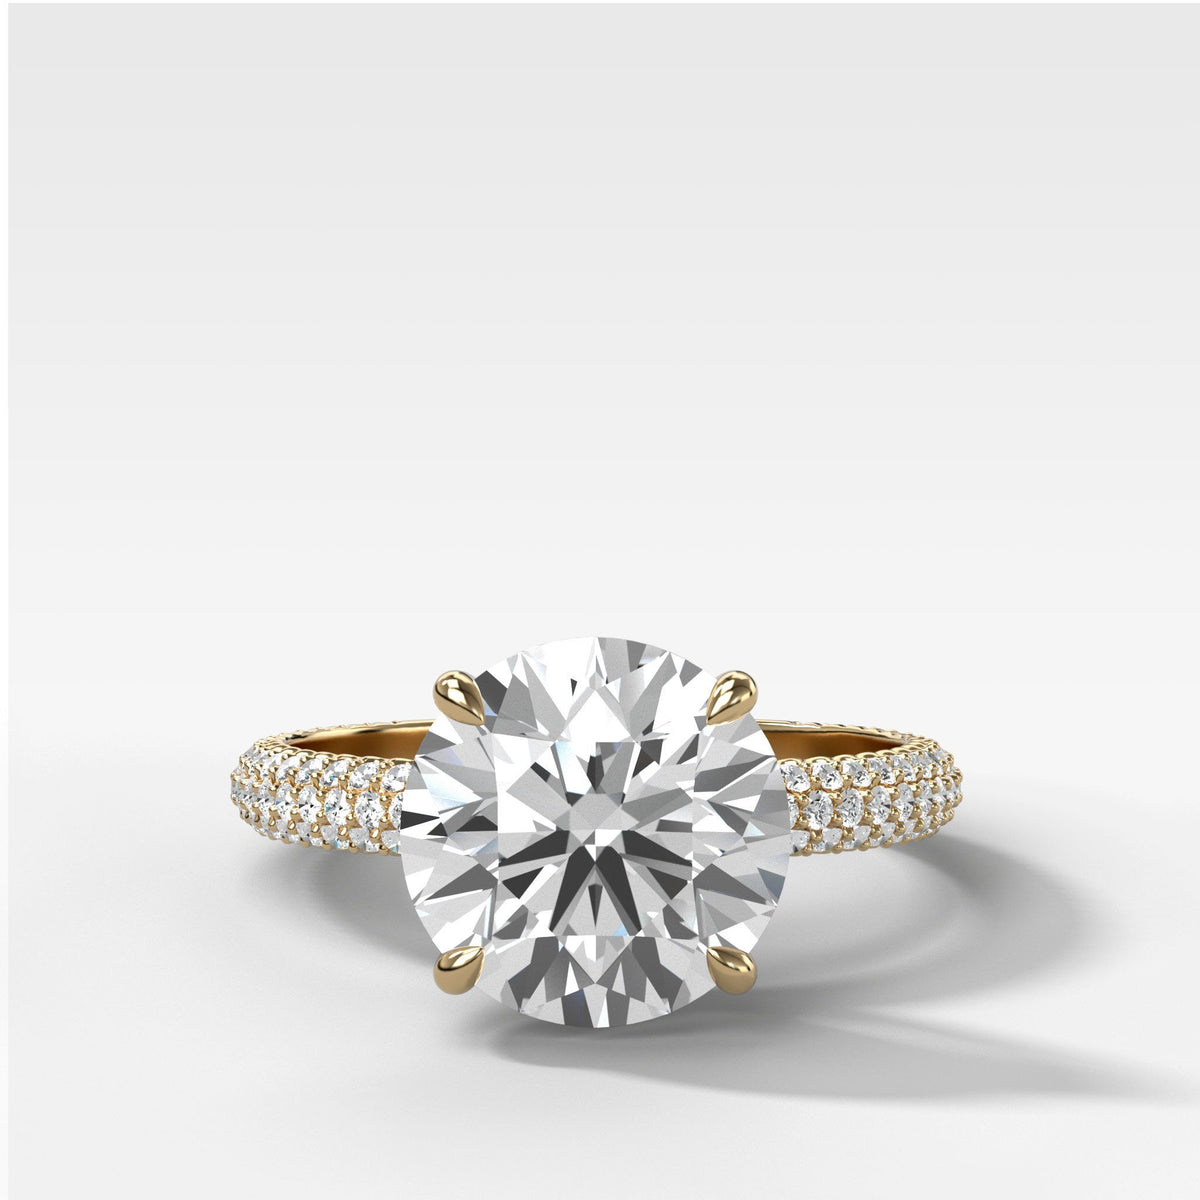 Triple Row Pav≈Ω Engagement Ring With Round Cut by Good Stone in Yellow Gold